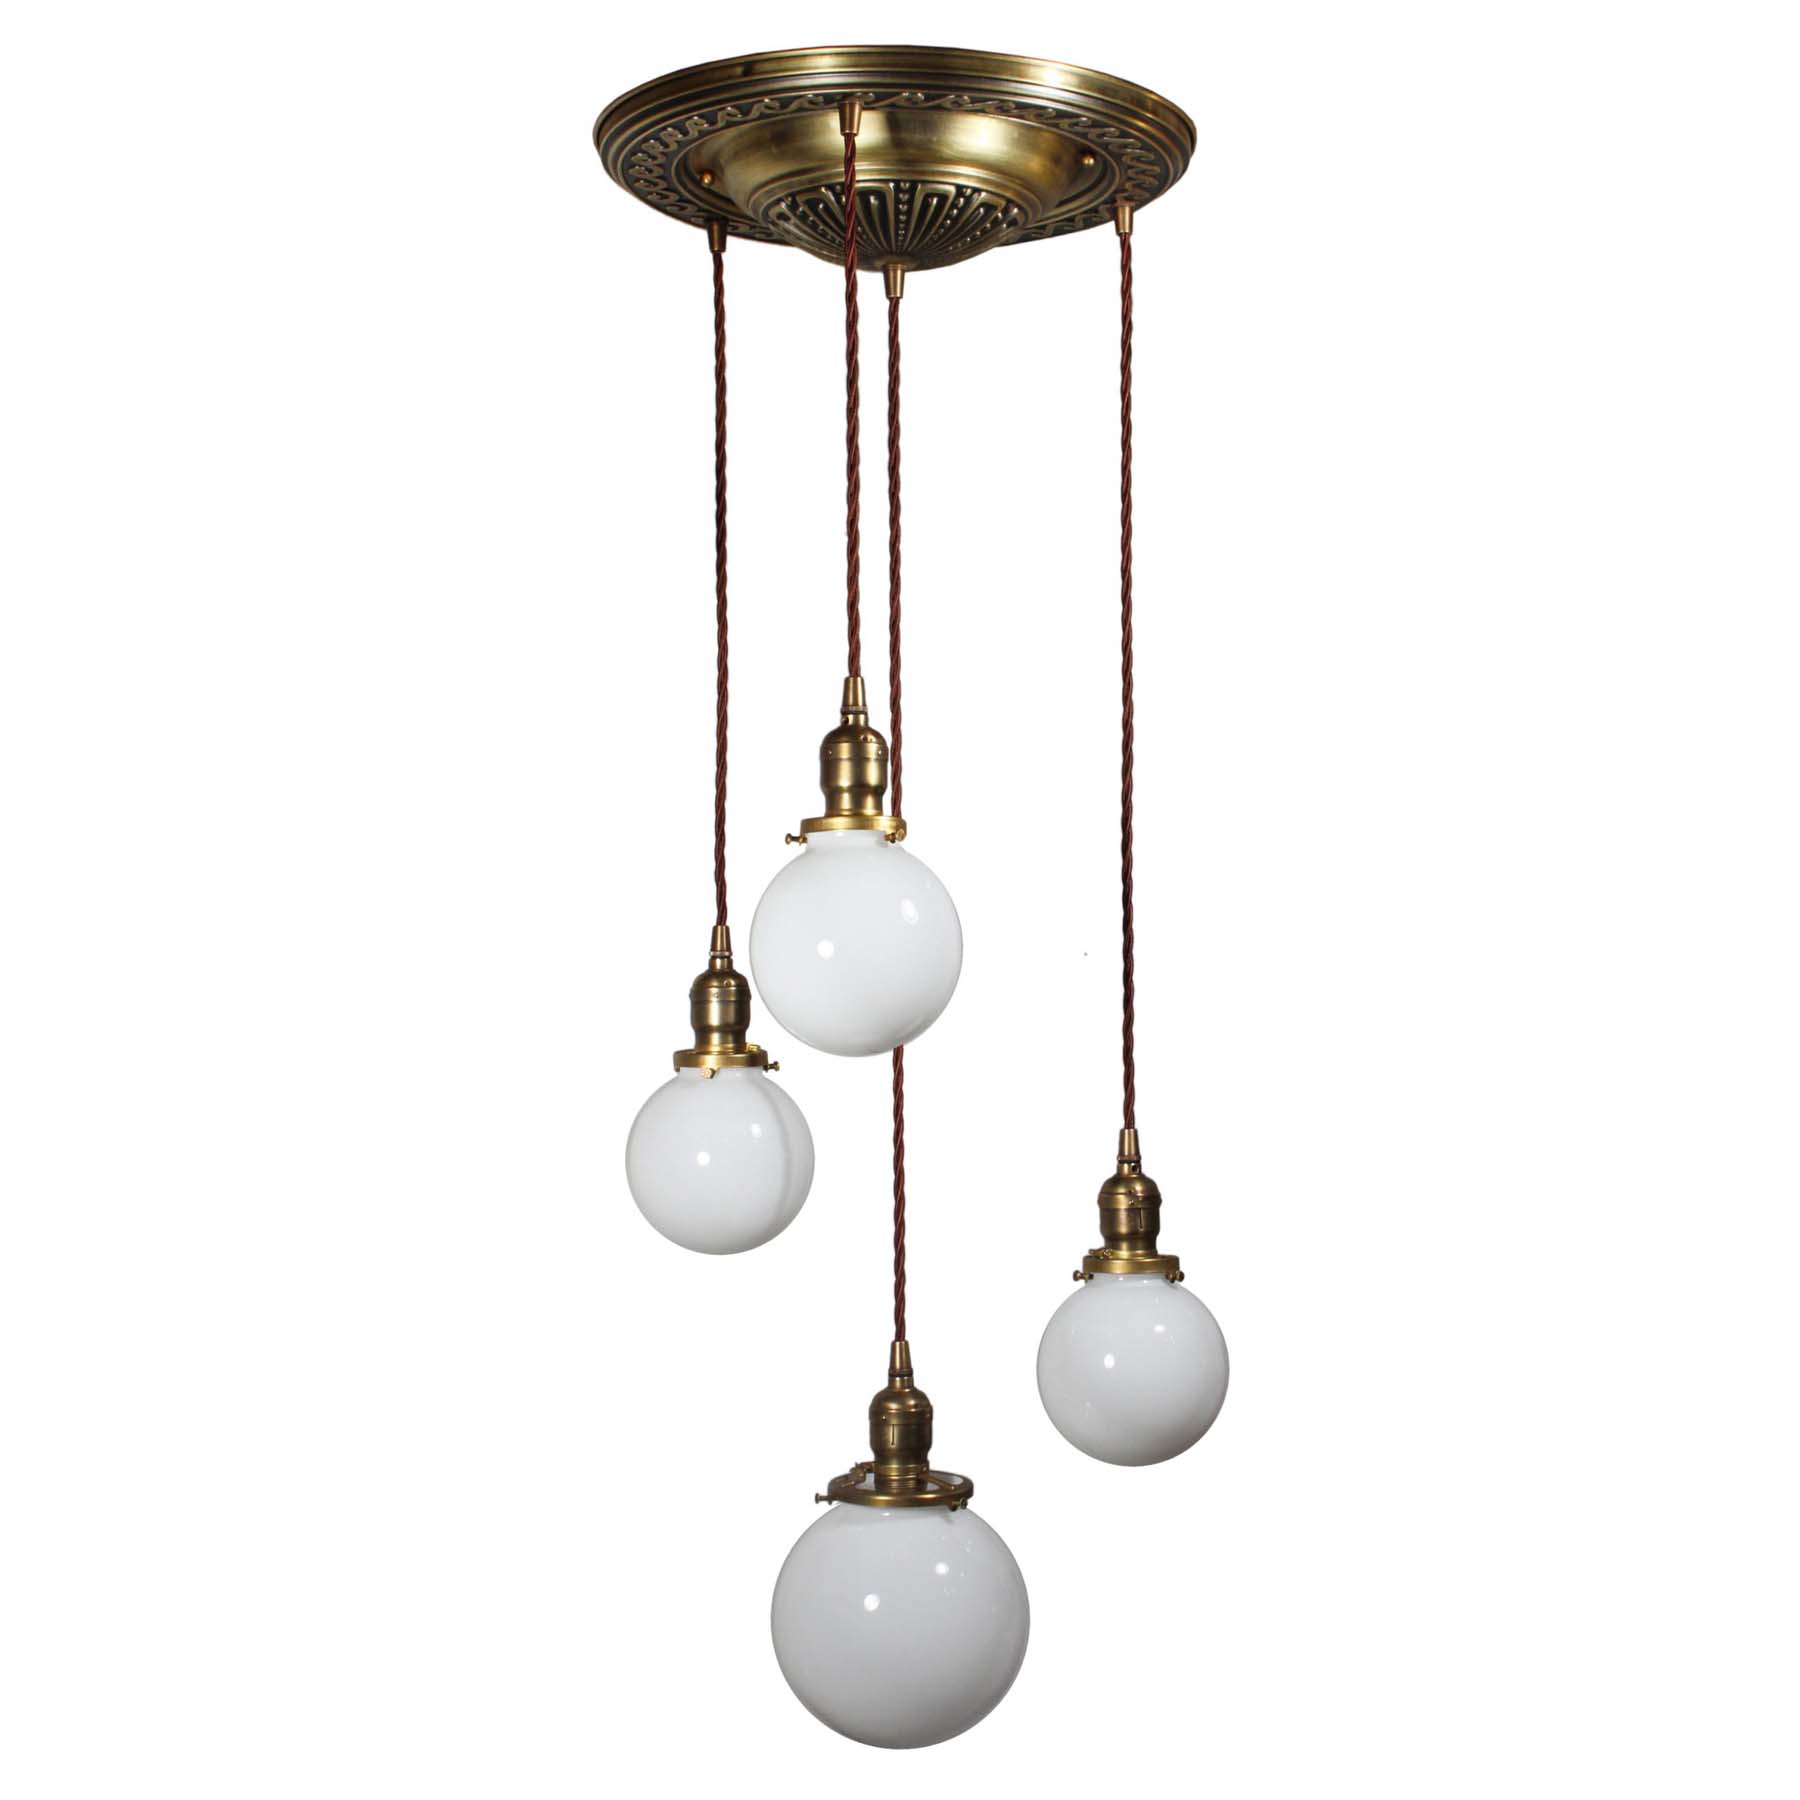 SOLD Antique Semi-Flush Brass Chandelier with Ball Shades-0